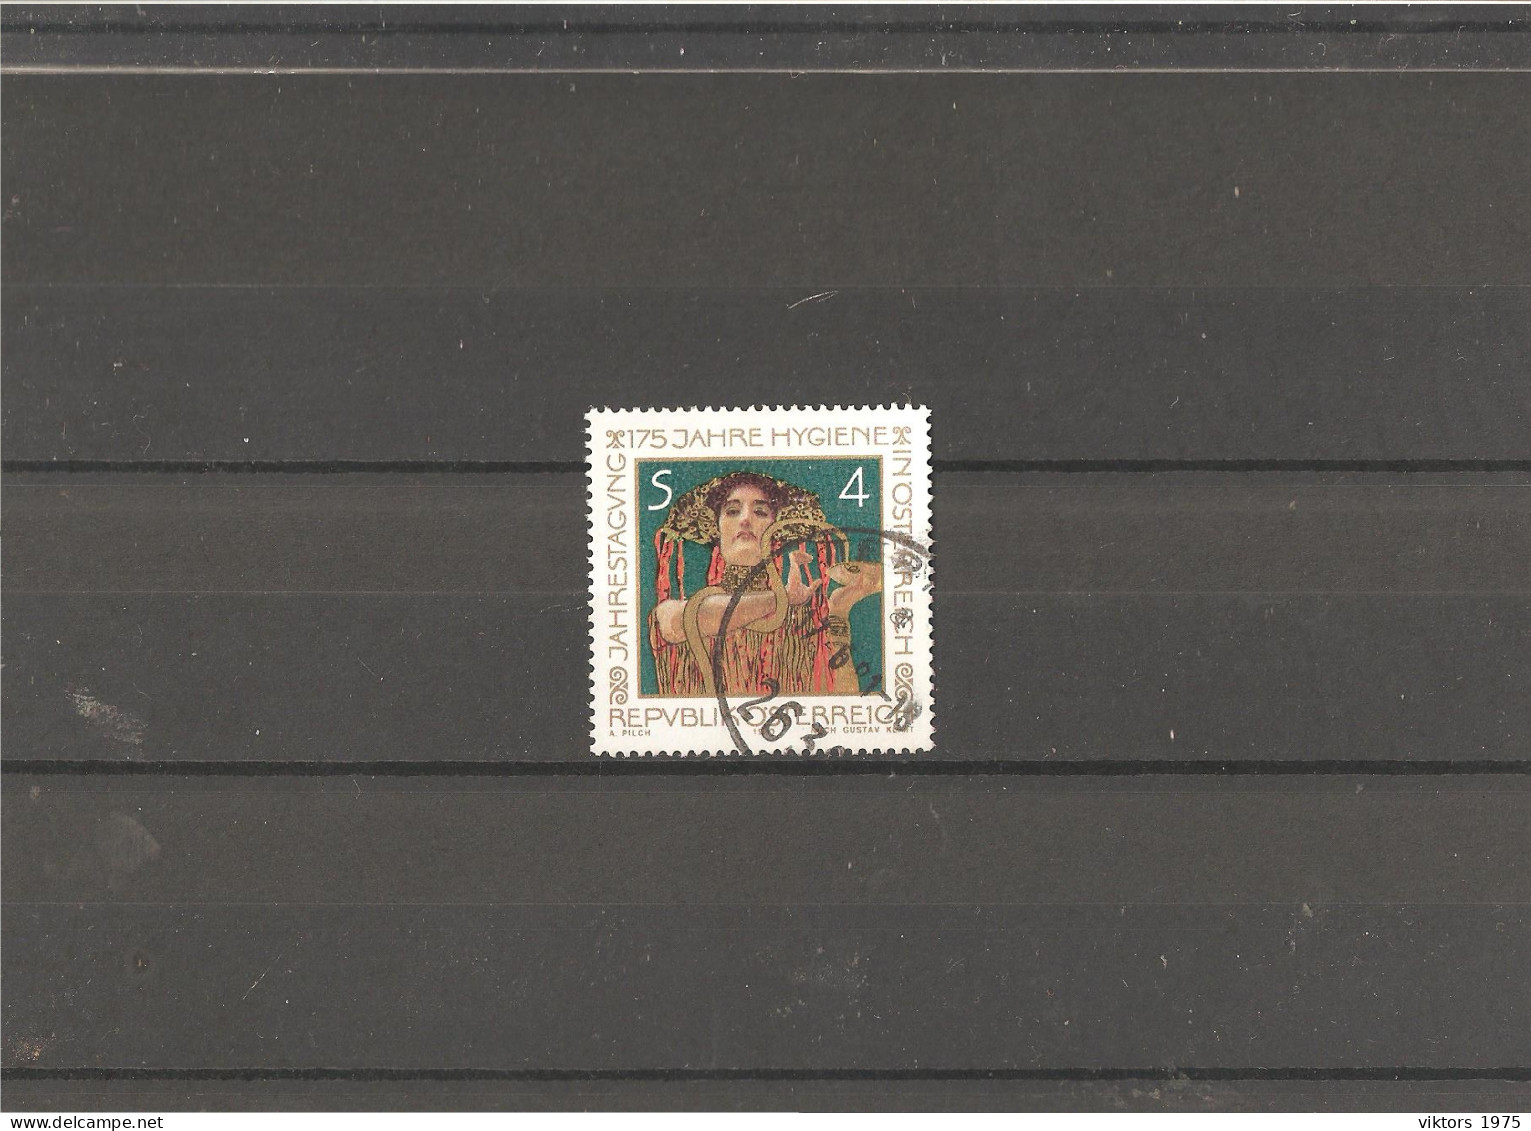 Used Stamp Nr.1643 In MICHEL Catalog - Used Stamps